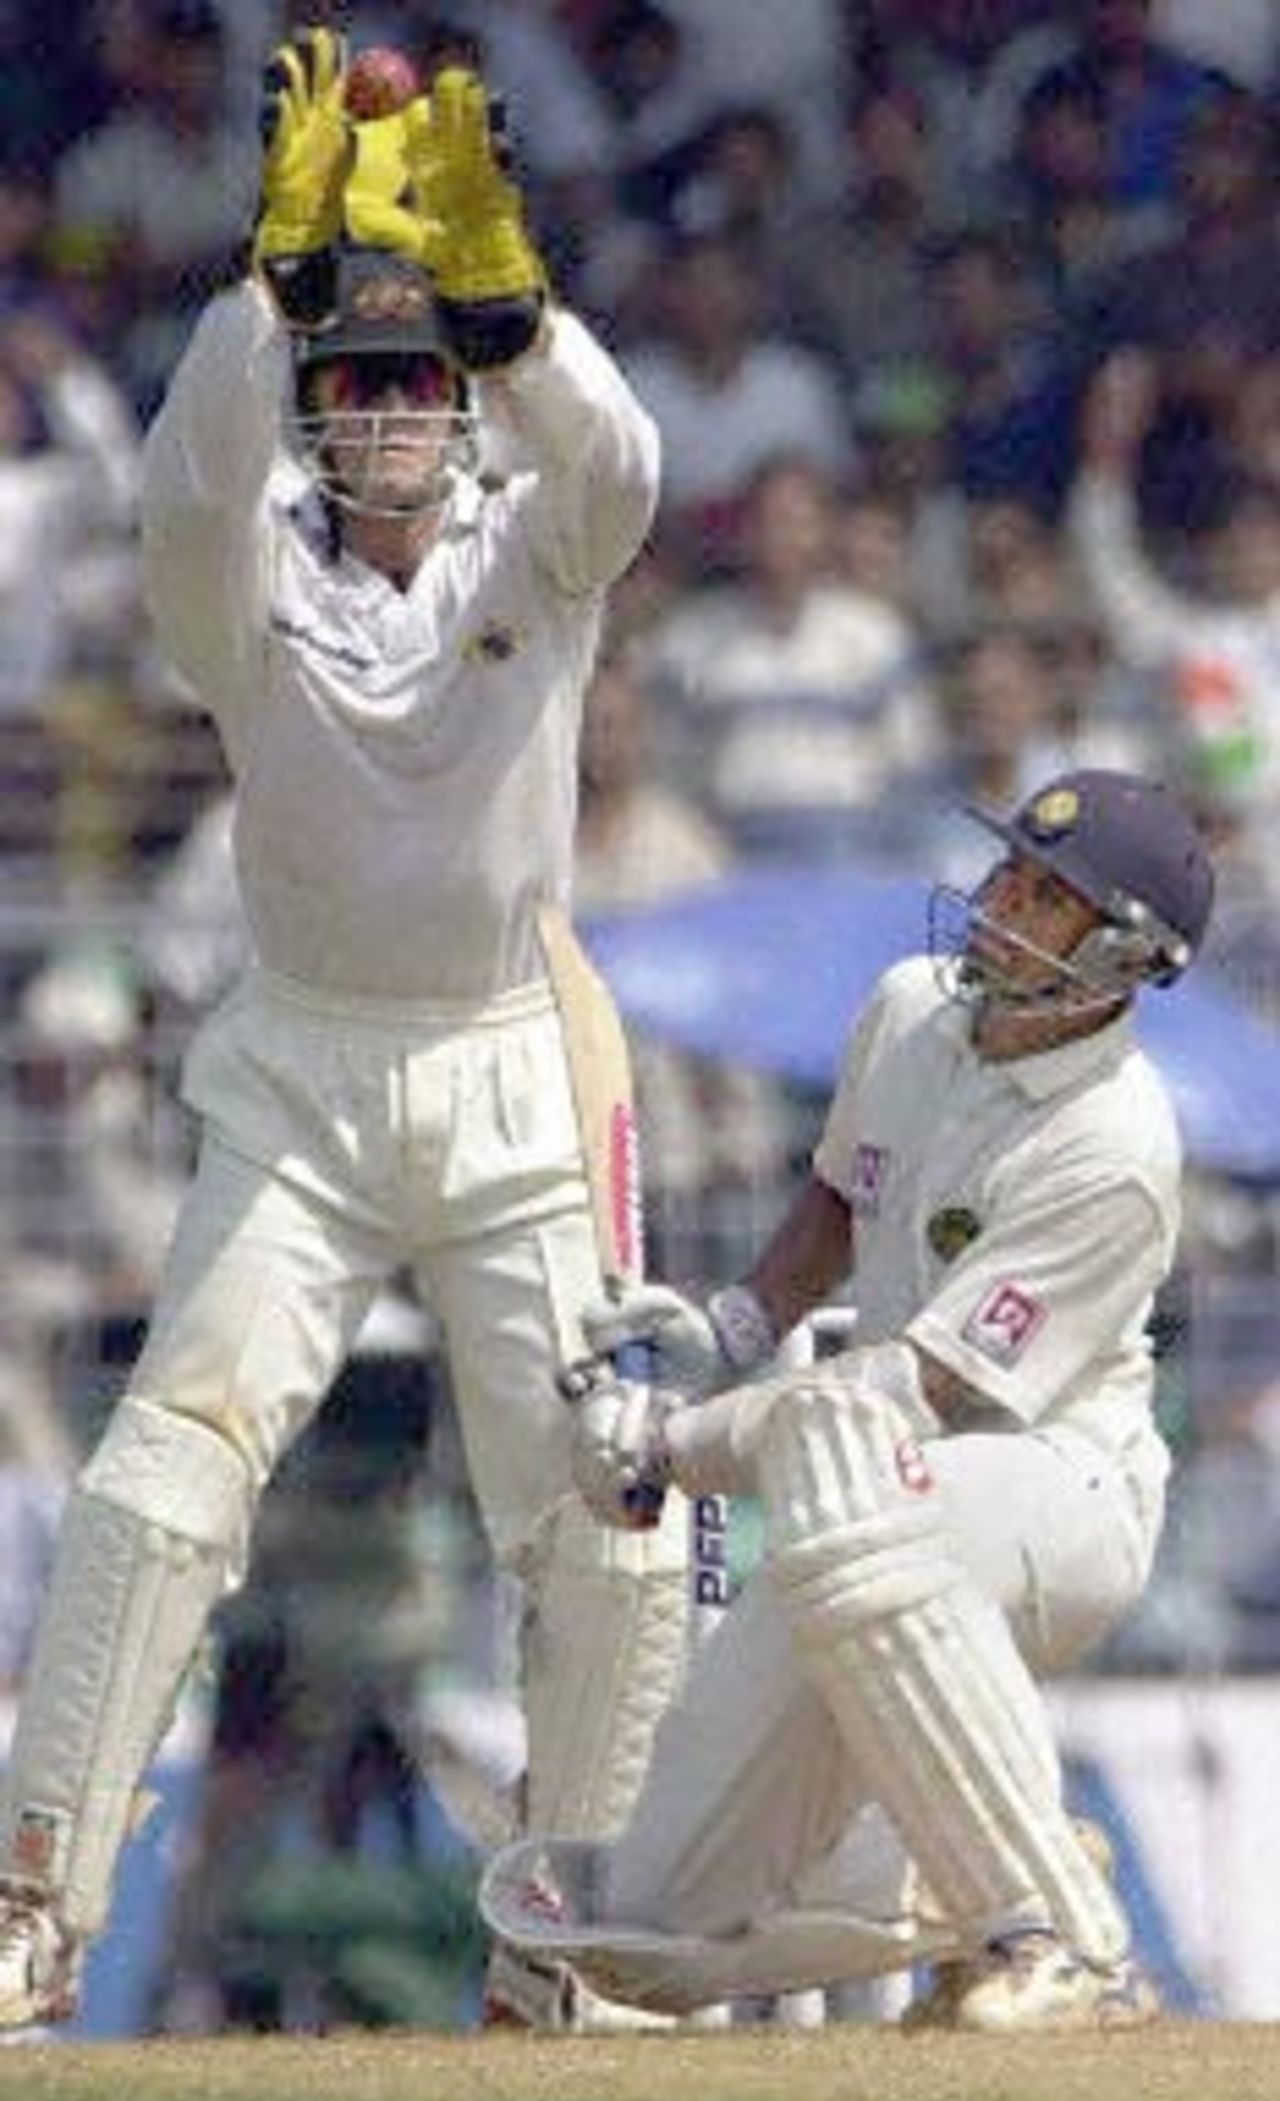 Indian batsman Rahul Dravid ducks as Australian wicketkeeper Adam Gilchrist jumps to catch a bouncer from Australian paceman Damien Fleming during the third day's play of the first test match between India and Australia at the Wankhade stadium in Mumbai 01 March 2001. Dravid was unbeaten at 26 as India went to lunch without losing a wicket in the first two hours of play, after conceding a 173 runs lead to Australia in the first innings.